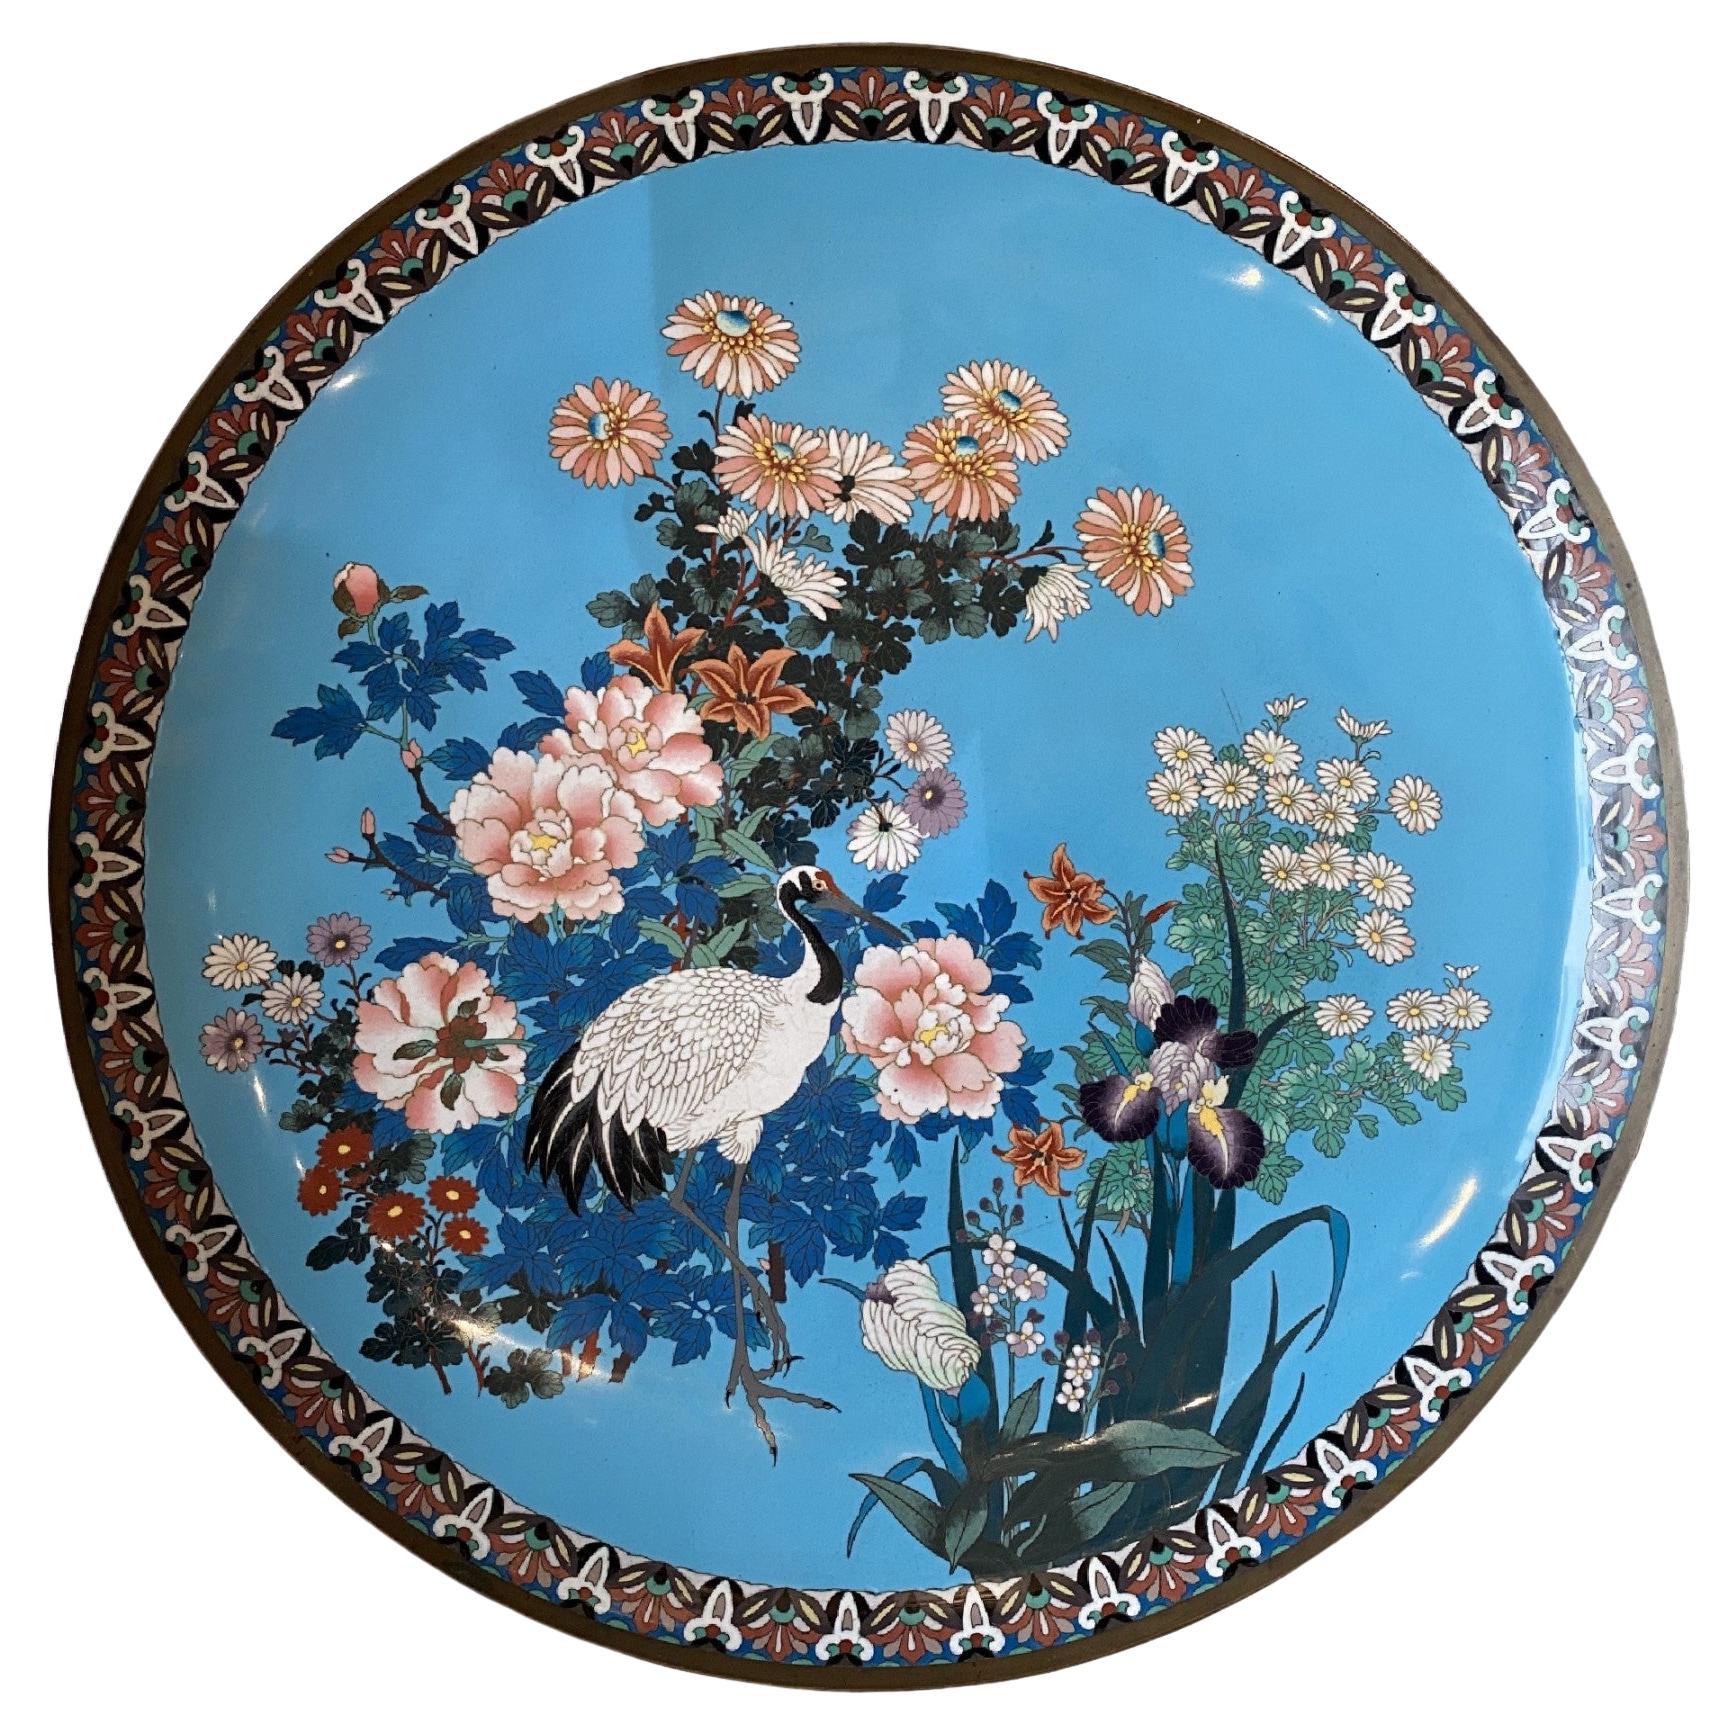 Japan, Very Large Cloisonne Charger, Meiji Period 19th Century